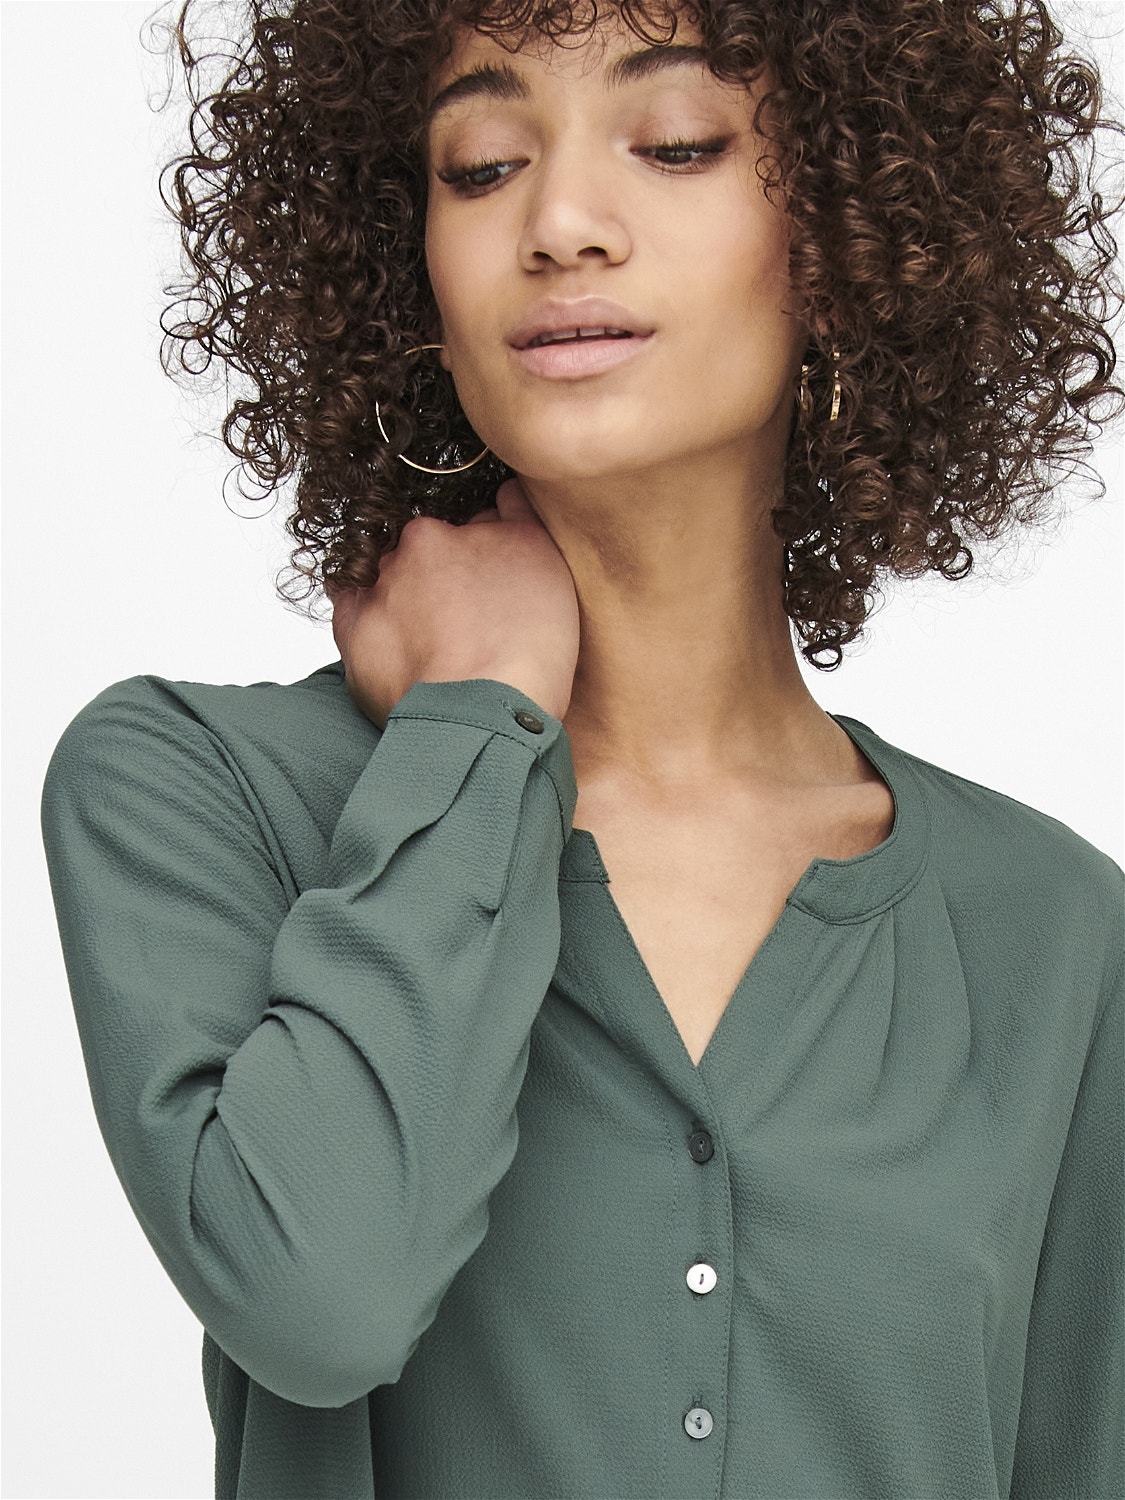 ONLY Solid Long sleeved shirt -Balsam Green - 15158111